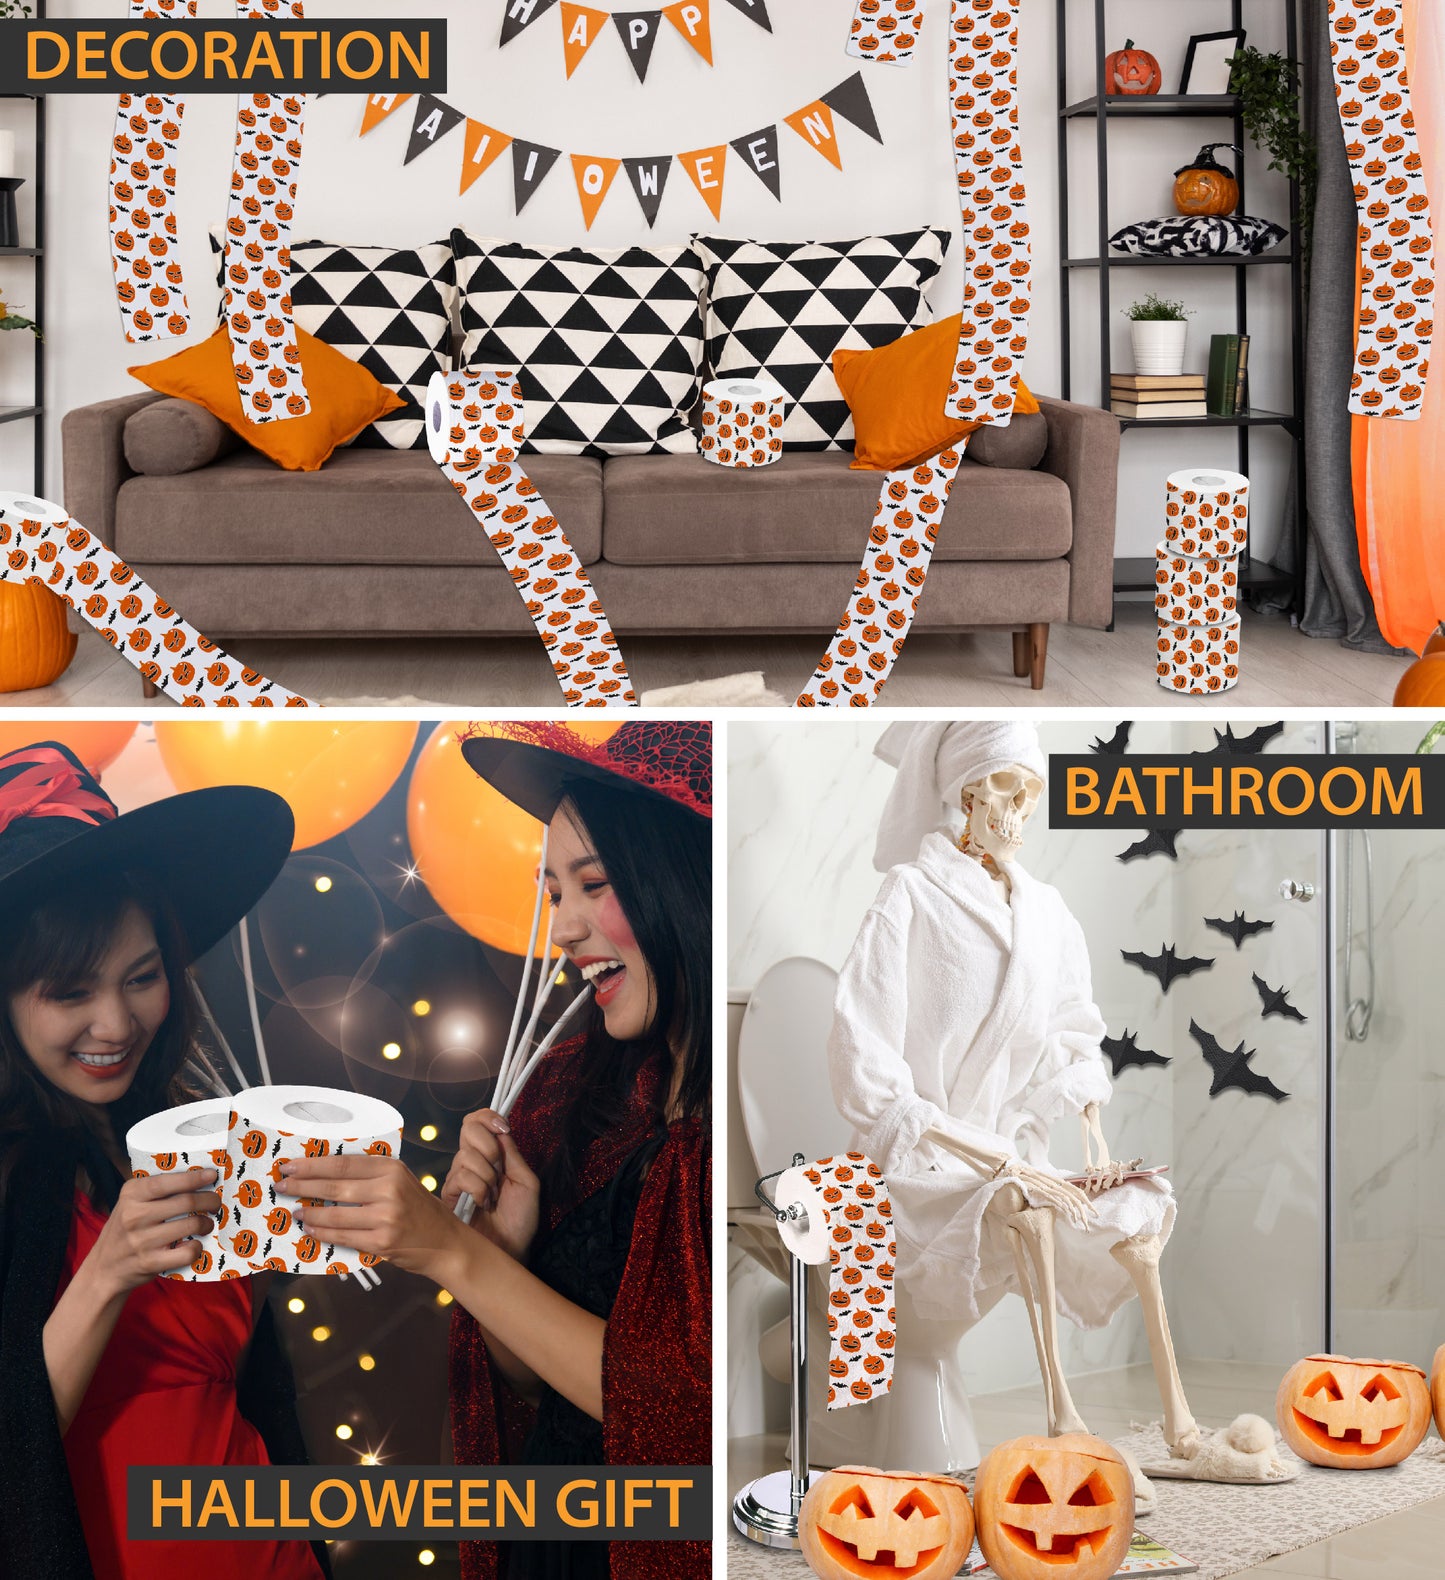 Printed TP Halloween Pumpkin and Bat Scary Decoration Toilet Paper Roll Gift